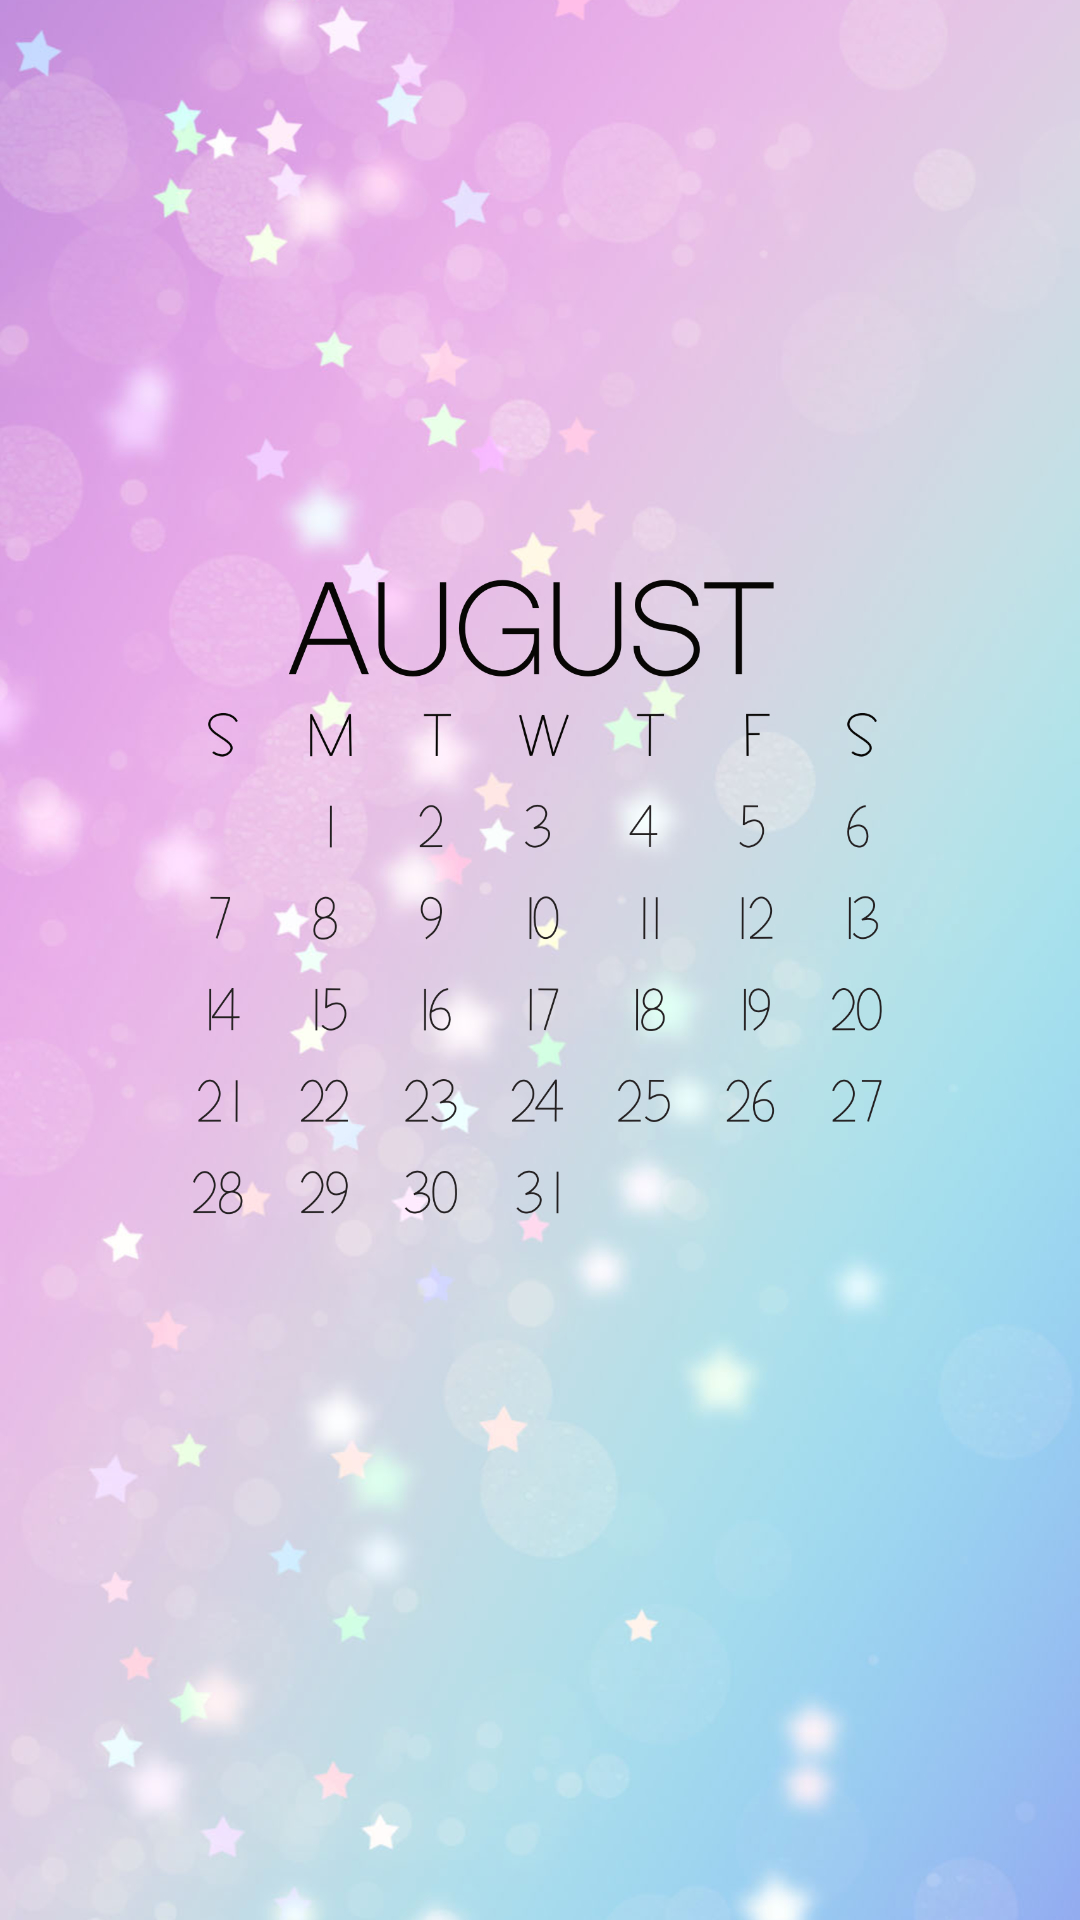 August Wallpaper For iPhone